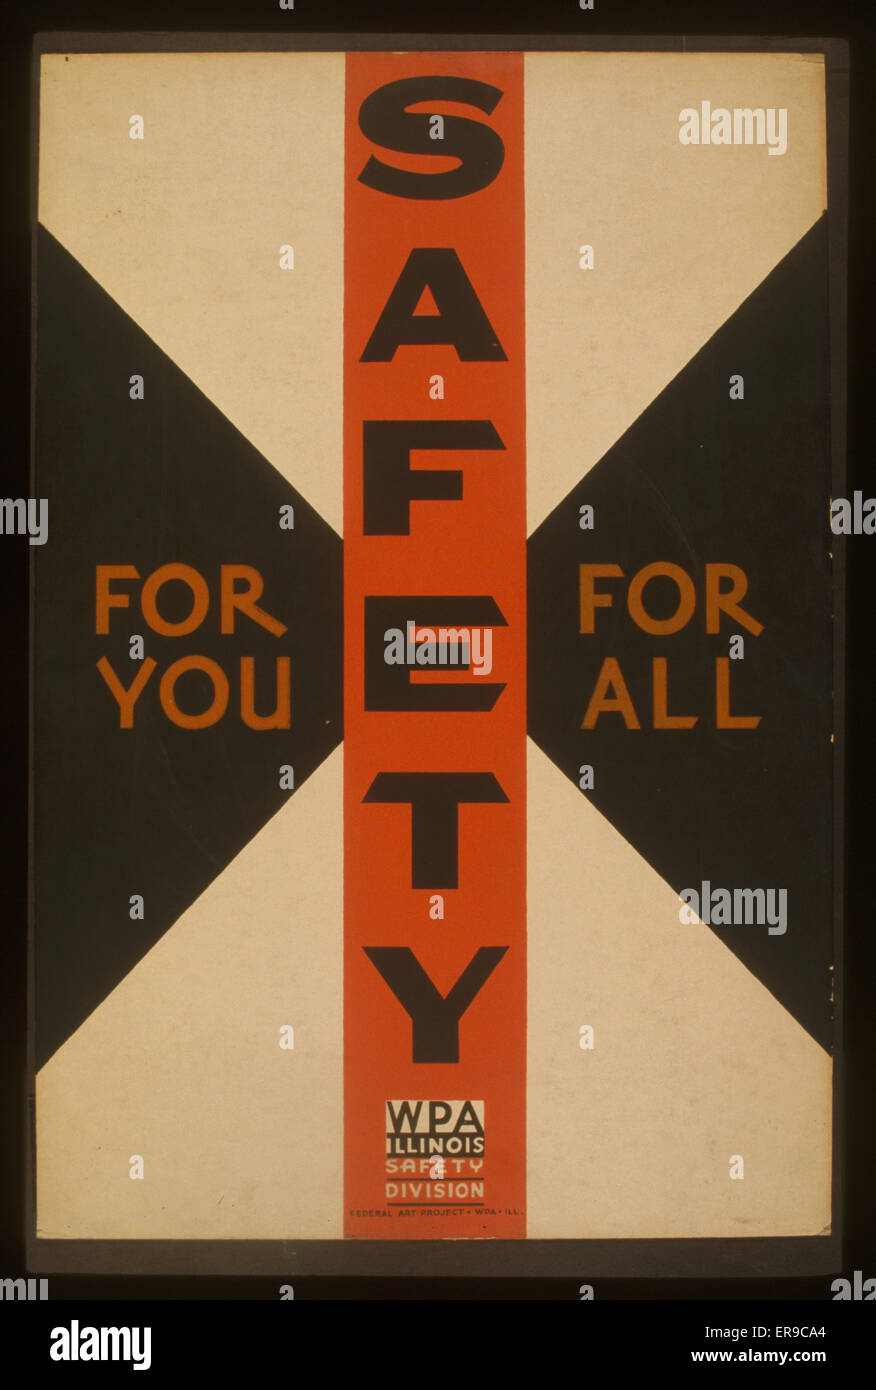 Safety for you, for all. Poster for the WPA Illinois Safety Division promoting safety, showing a civil defense symbol. Date 1936. Stock Photo